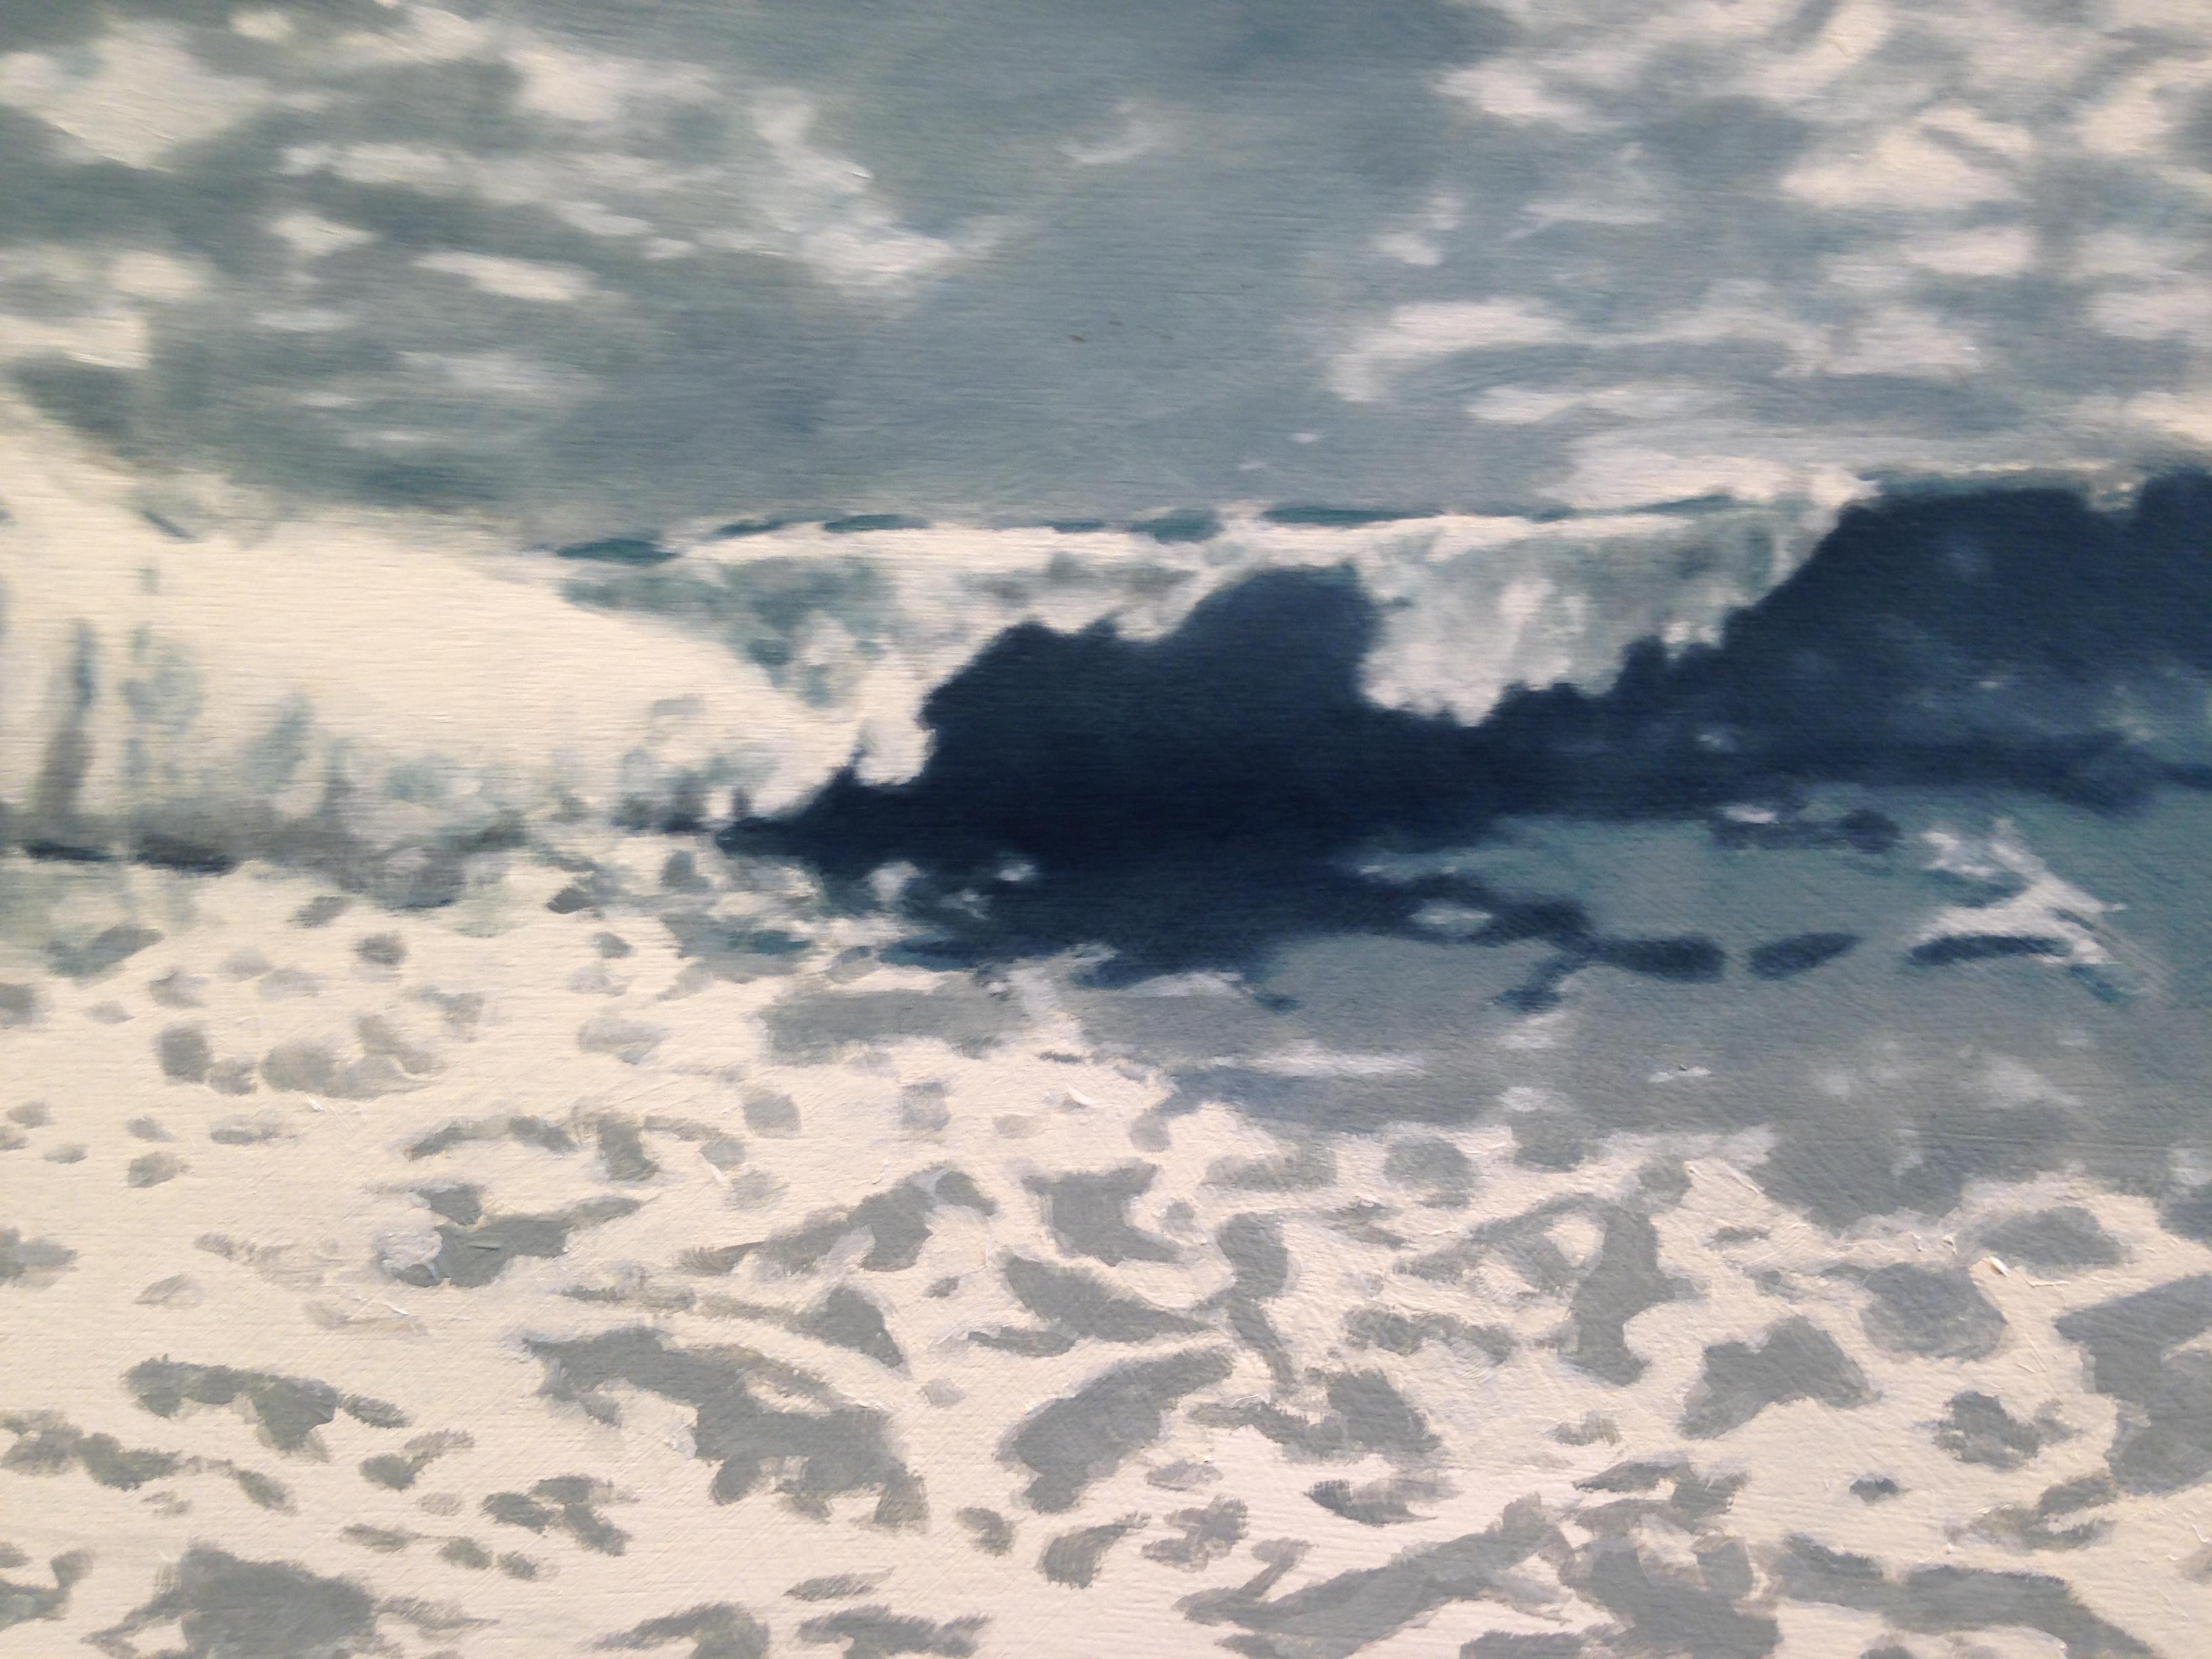 Ocean Beach 1, atmospheric contemporary realism, oil on panel - Painting by Philip Ludwig